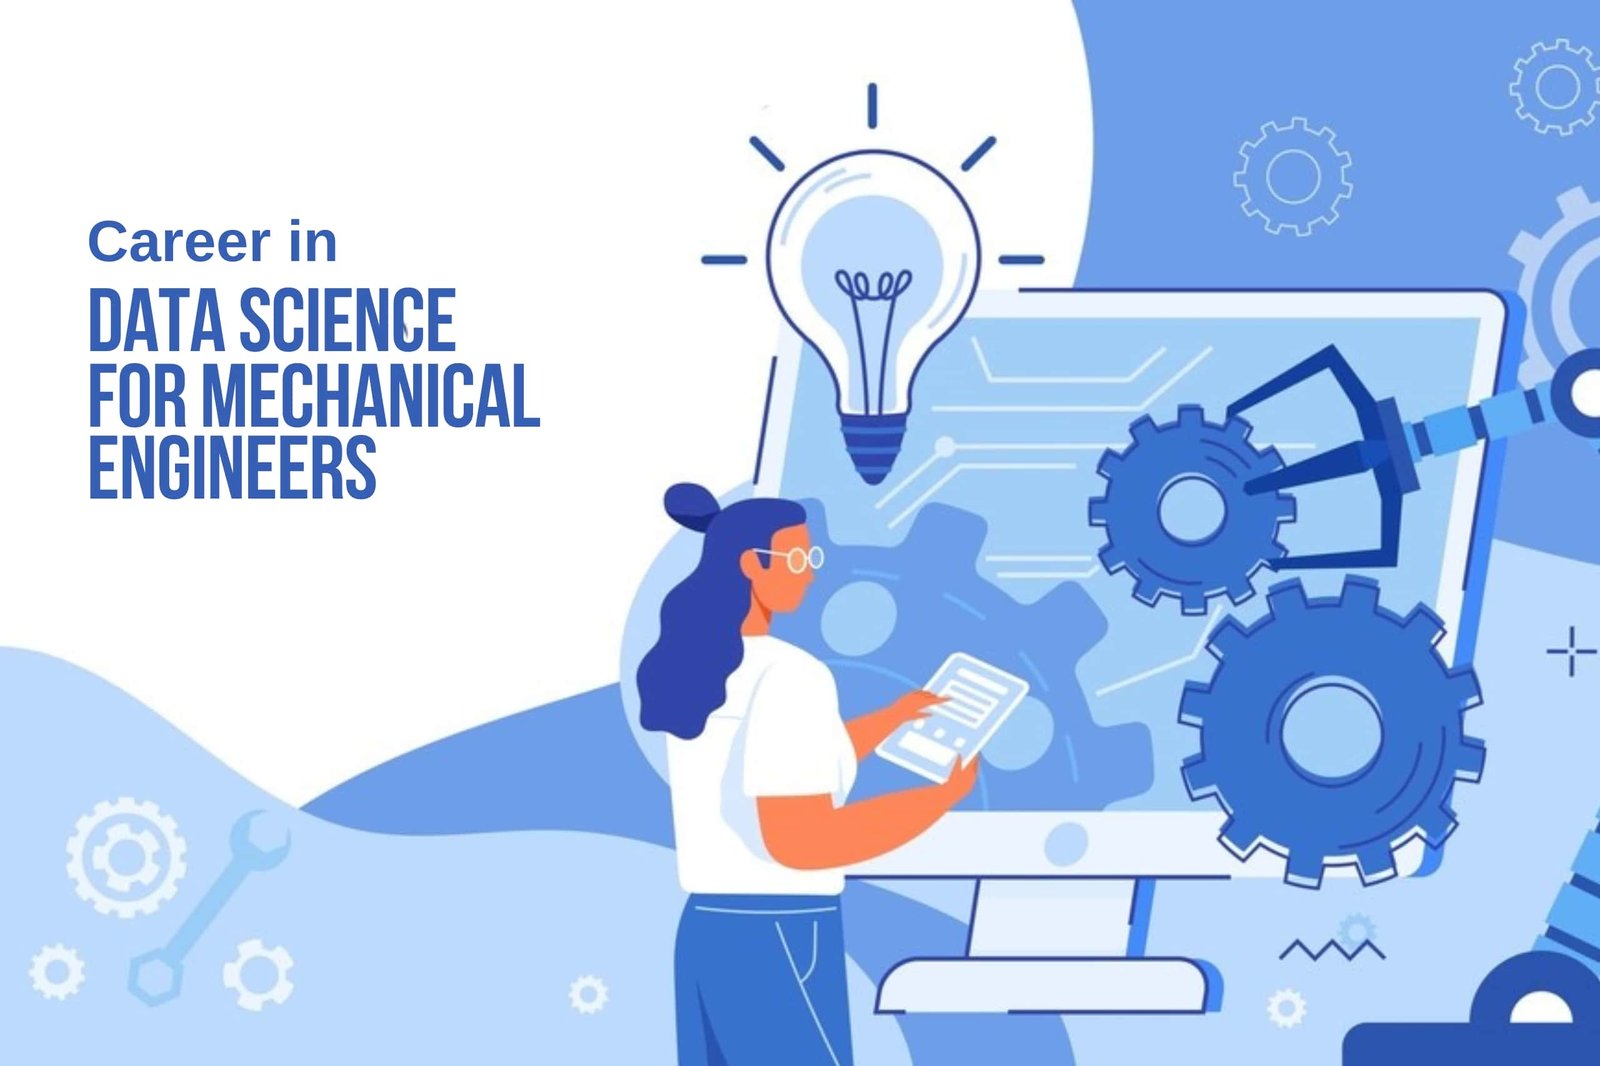 Can a Mechanical Engineer become Data Scientist?